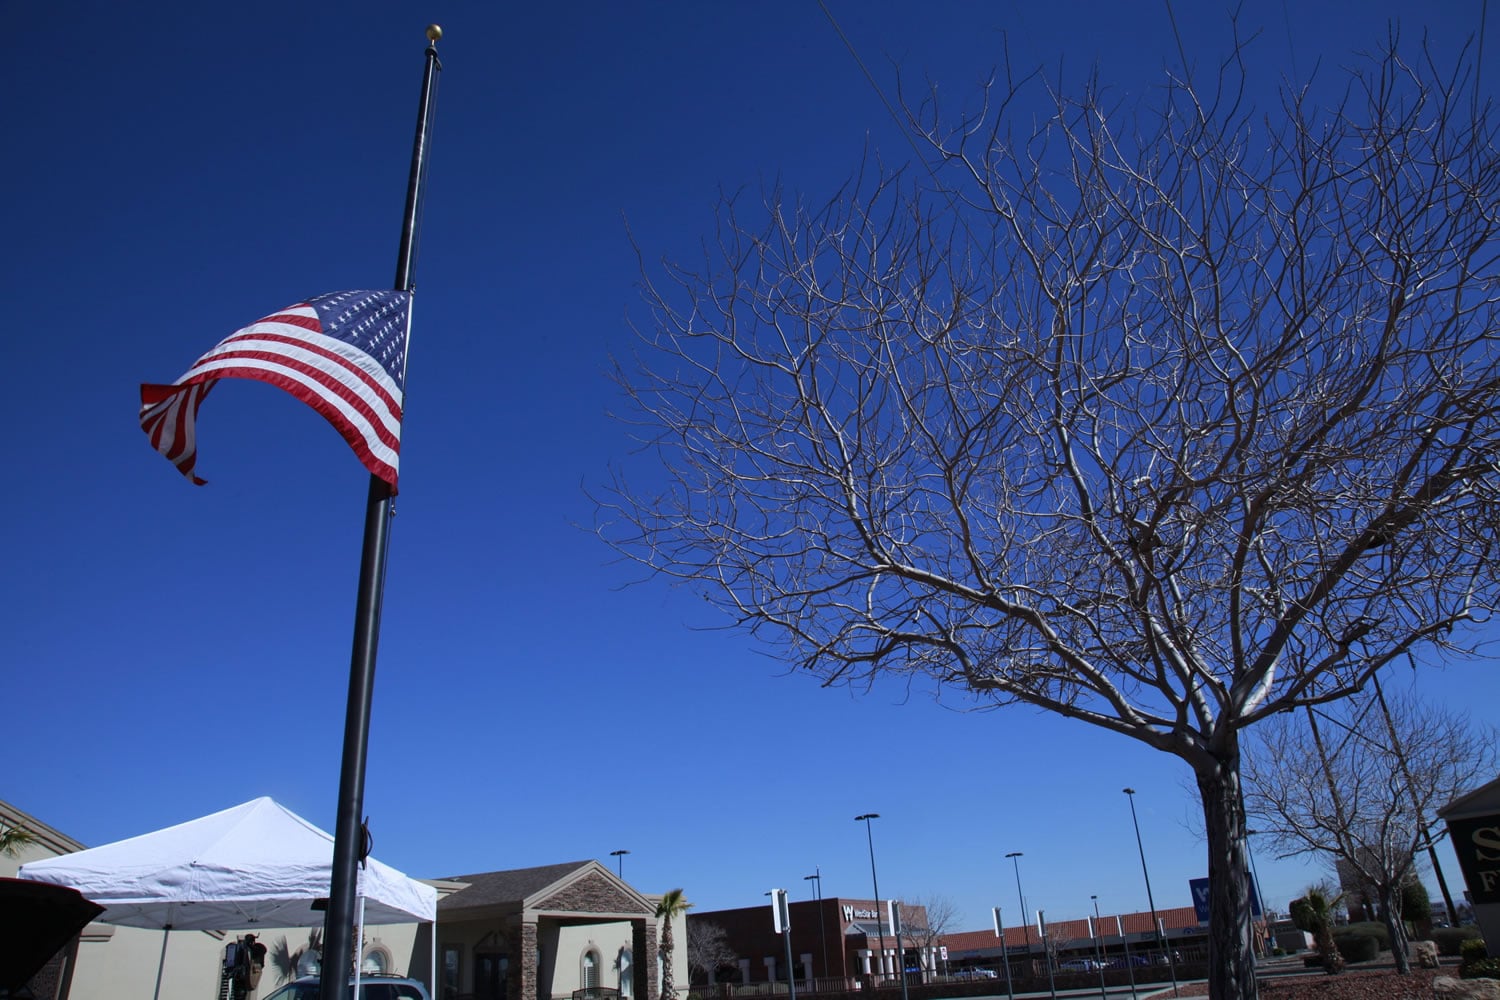 A flag flies at half-staff outside the funeral home taking care of the body of U.S. Supreme Court Justice Antonin Scalia on Sunday in El Paso, Texas. Scalia died while vacationing at a secluded ranch near the Texas-Mexico border over the weekend.